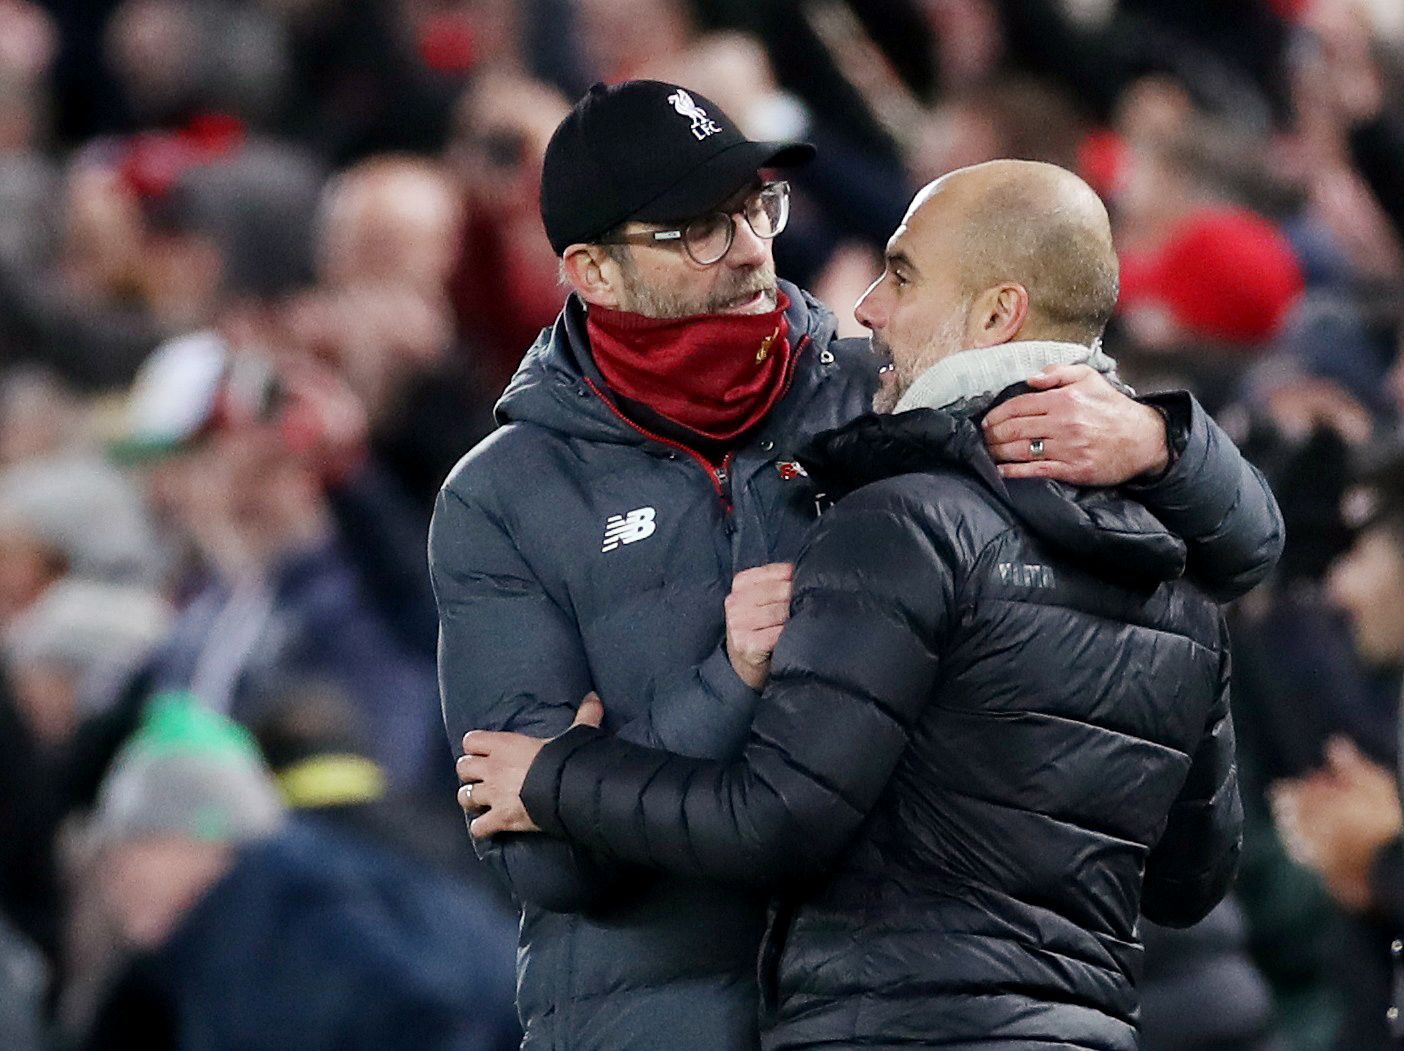 Soccer Football - Premier League - Liverpool v Manchester City - Anfield, Liverpool, Britain - November 10, 2019  Liverpool manager Juergen Klopp with Manchester City manager Pep Guardiola at the end of the match   Action Images via Reuters/Carl Recine  EDITORIAL USE ONLY. No use with unauthorized audio, video, data, fixture lists, club/league logos or 